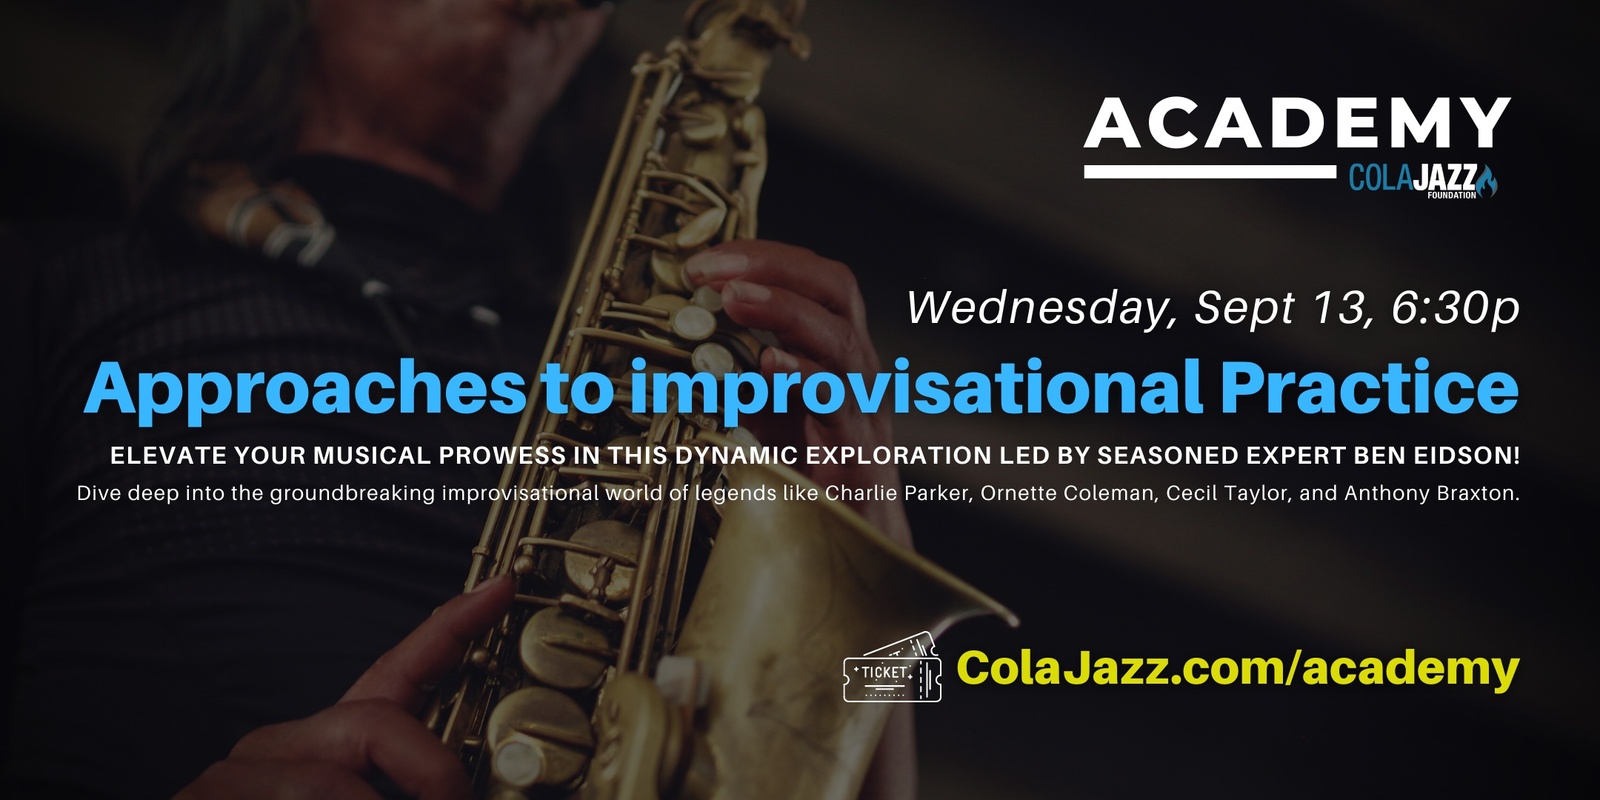 Banner image for ColaJazz Academy: Approaches to improvisational Practice with Ben Eidson